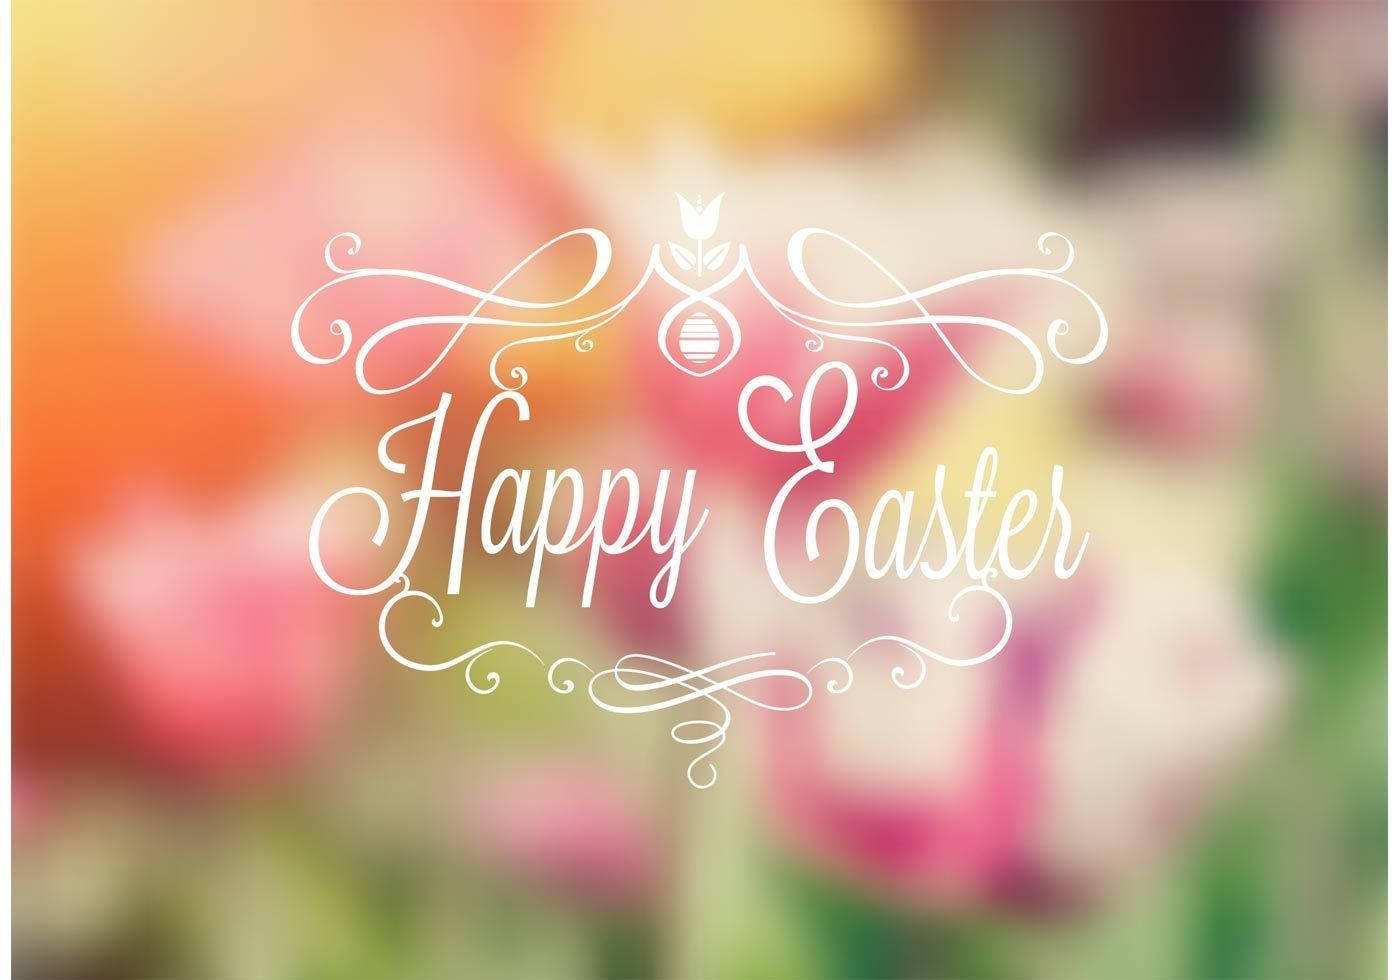 Happy Easter Calligraphy Over Blurry Flowers Wallpaper